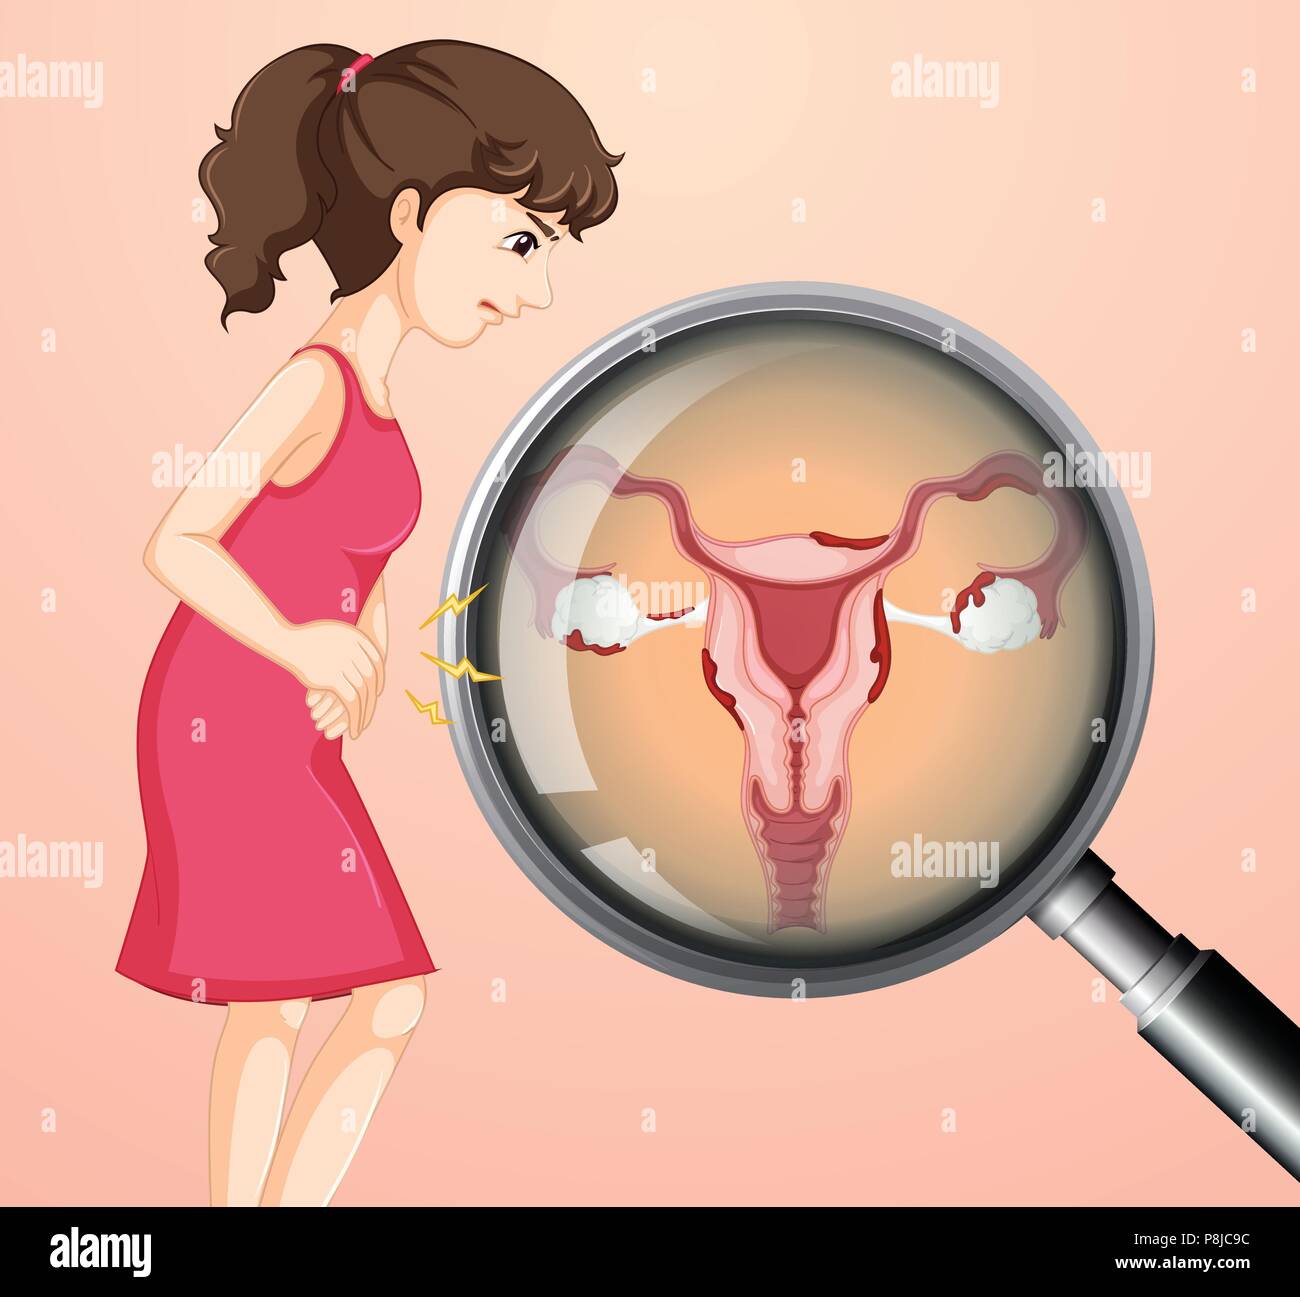 Woman with Ovarian Cancer  illustration Stock Vector